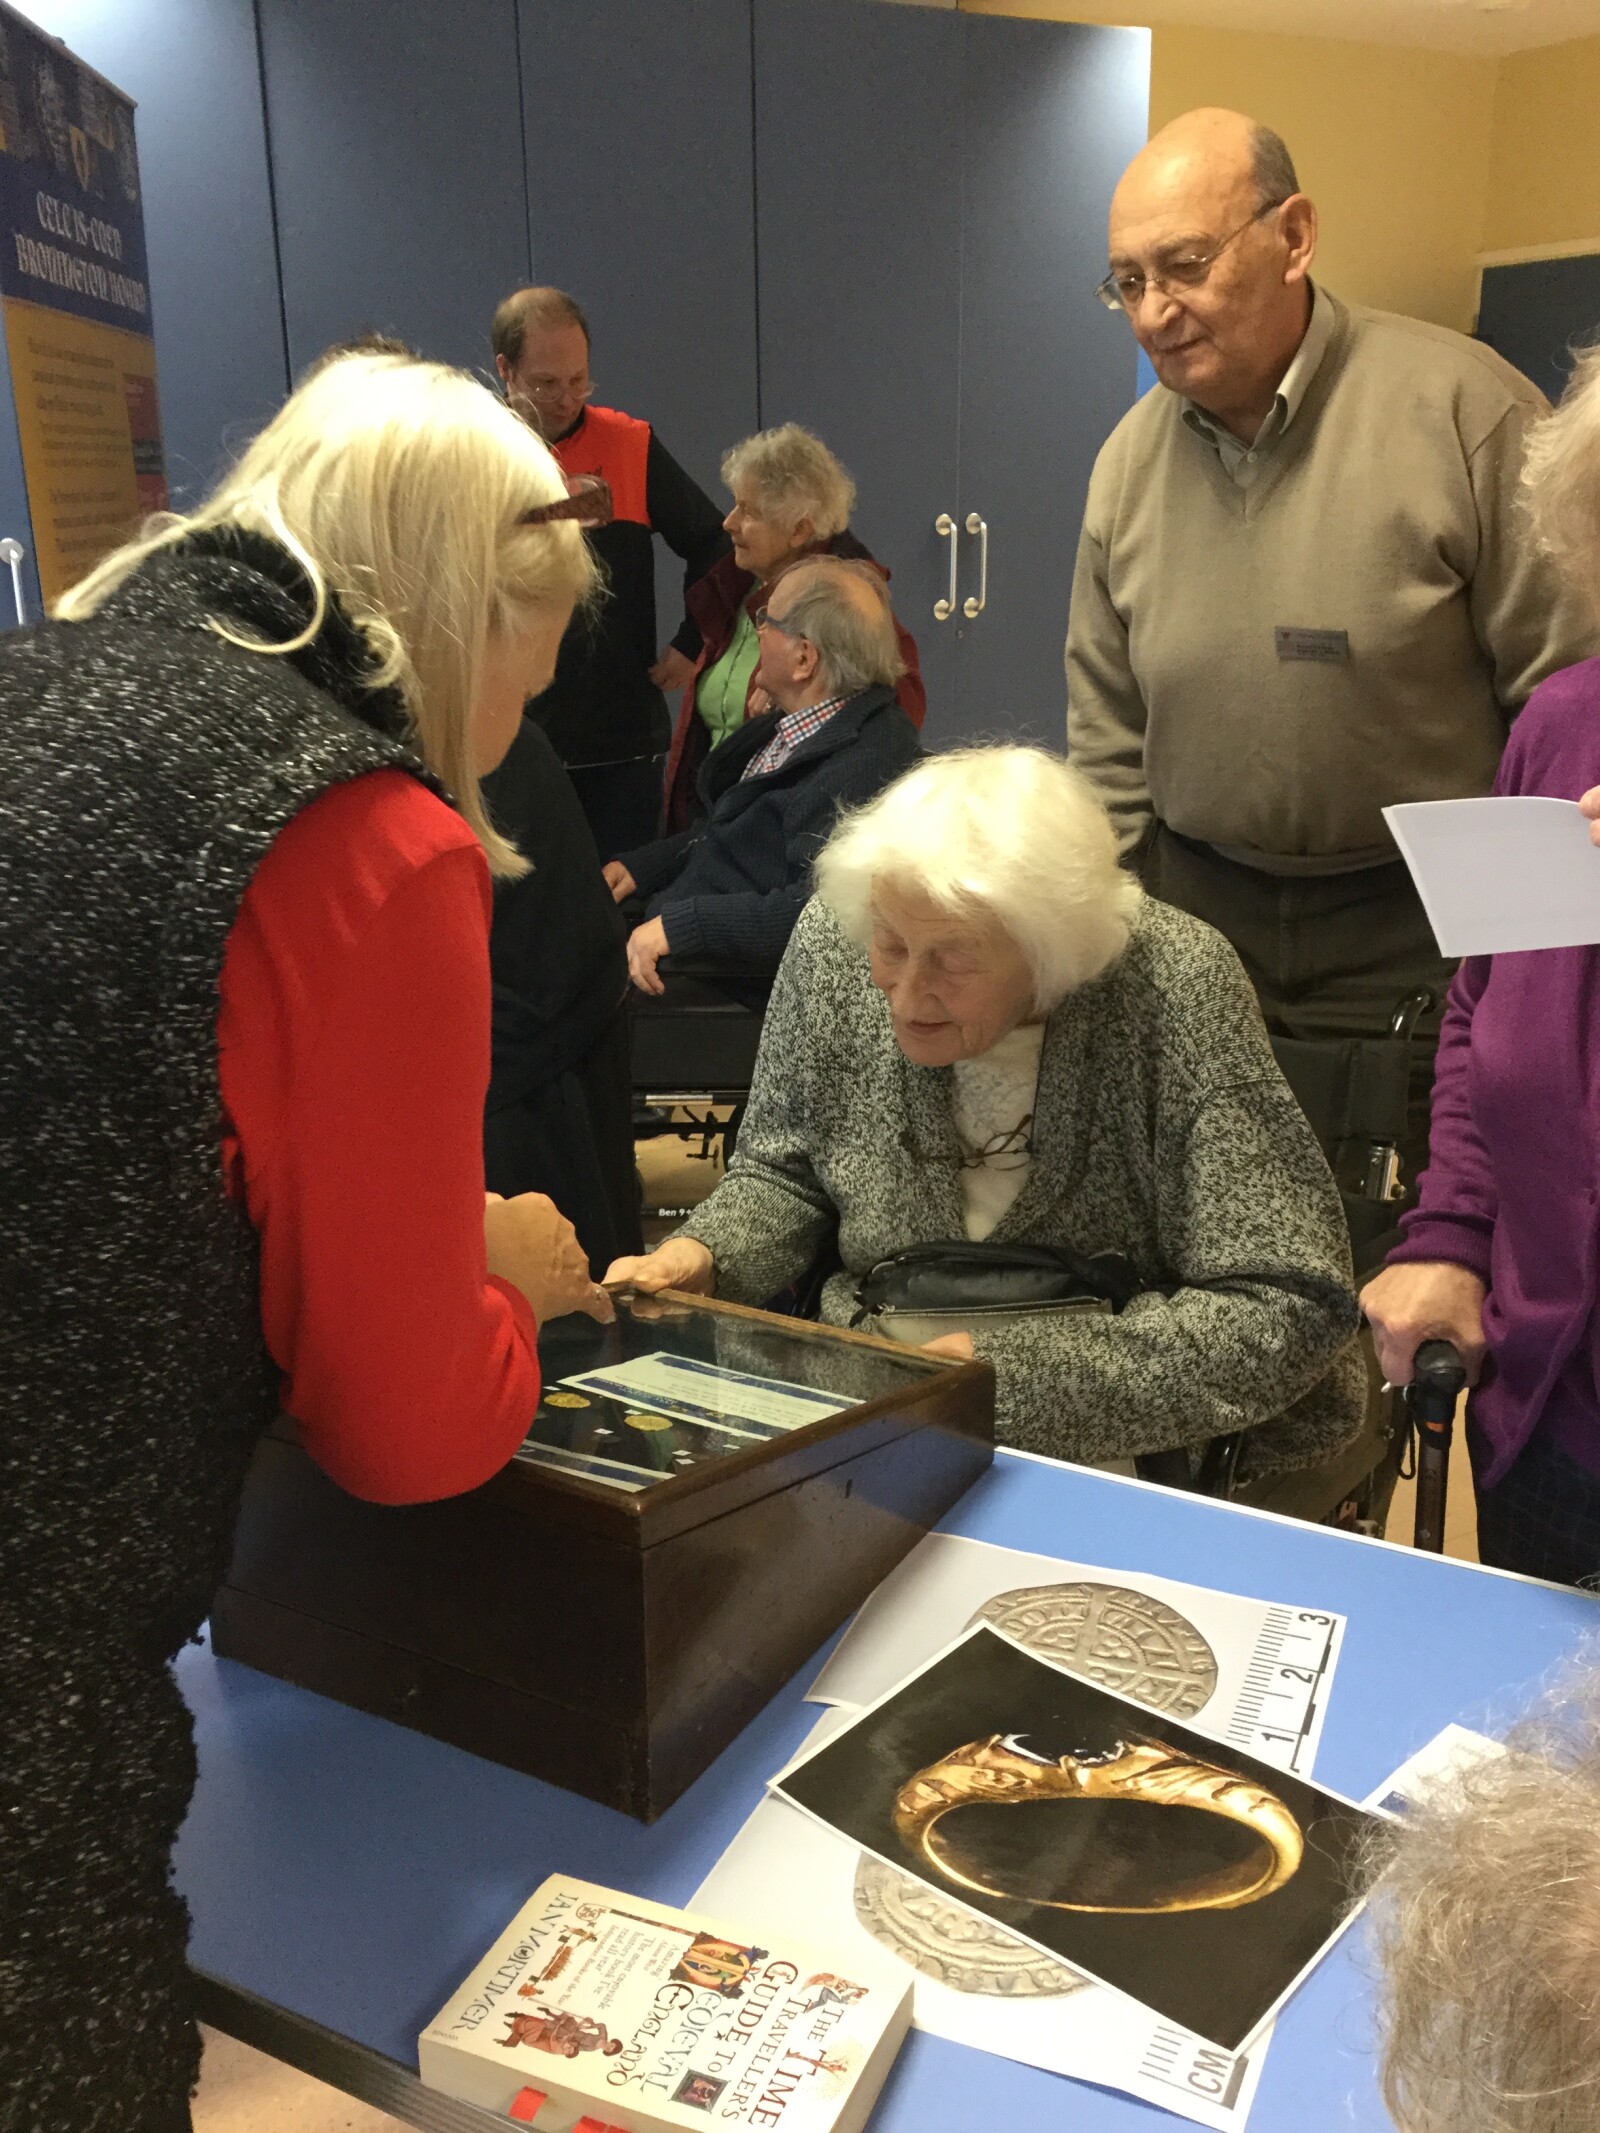 People discussing a display of coins.